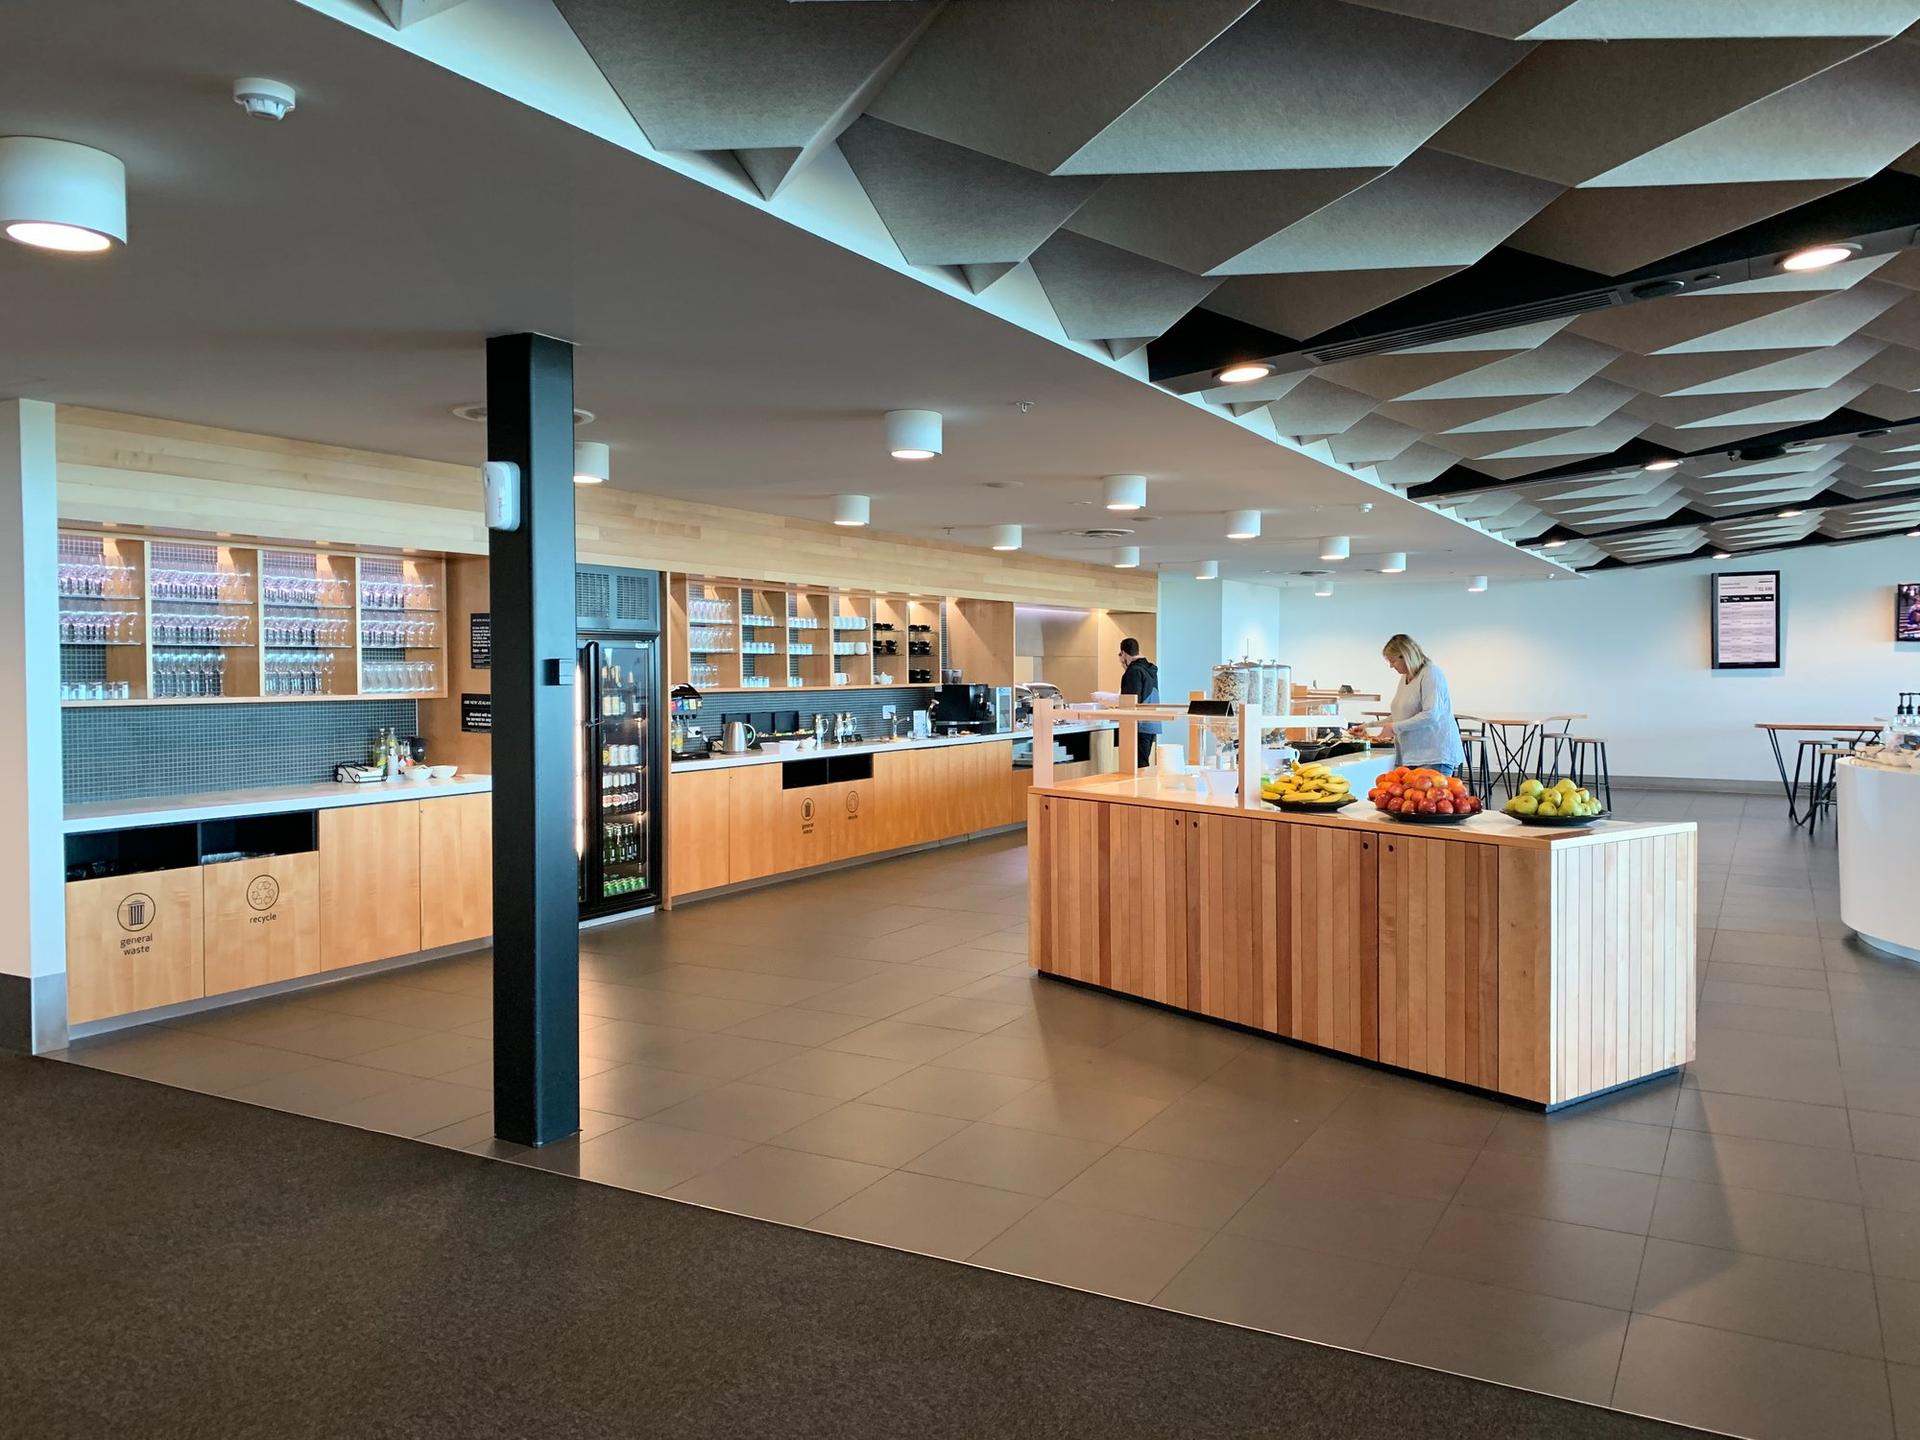 Air New Zealand Domestic Lounge image 4 of 6